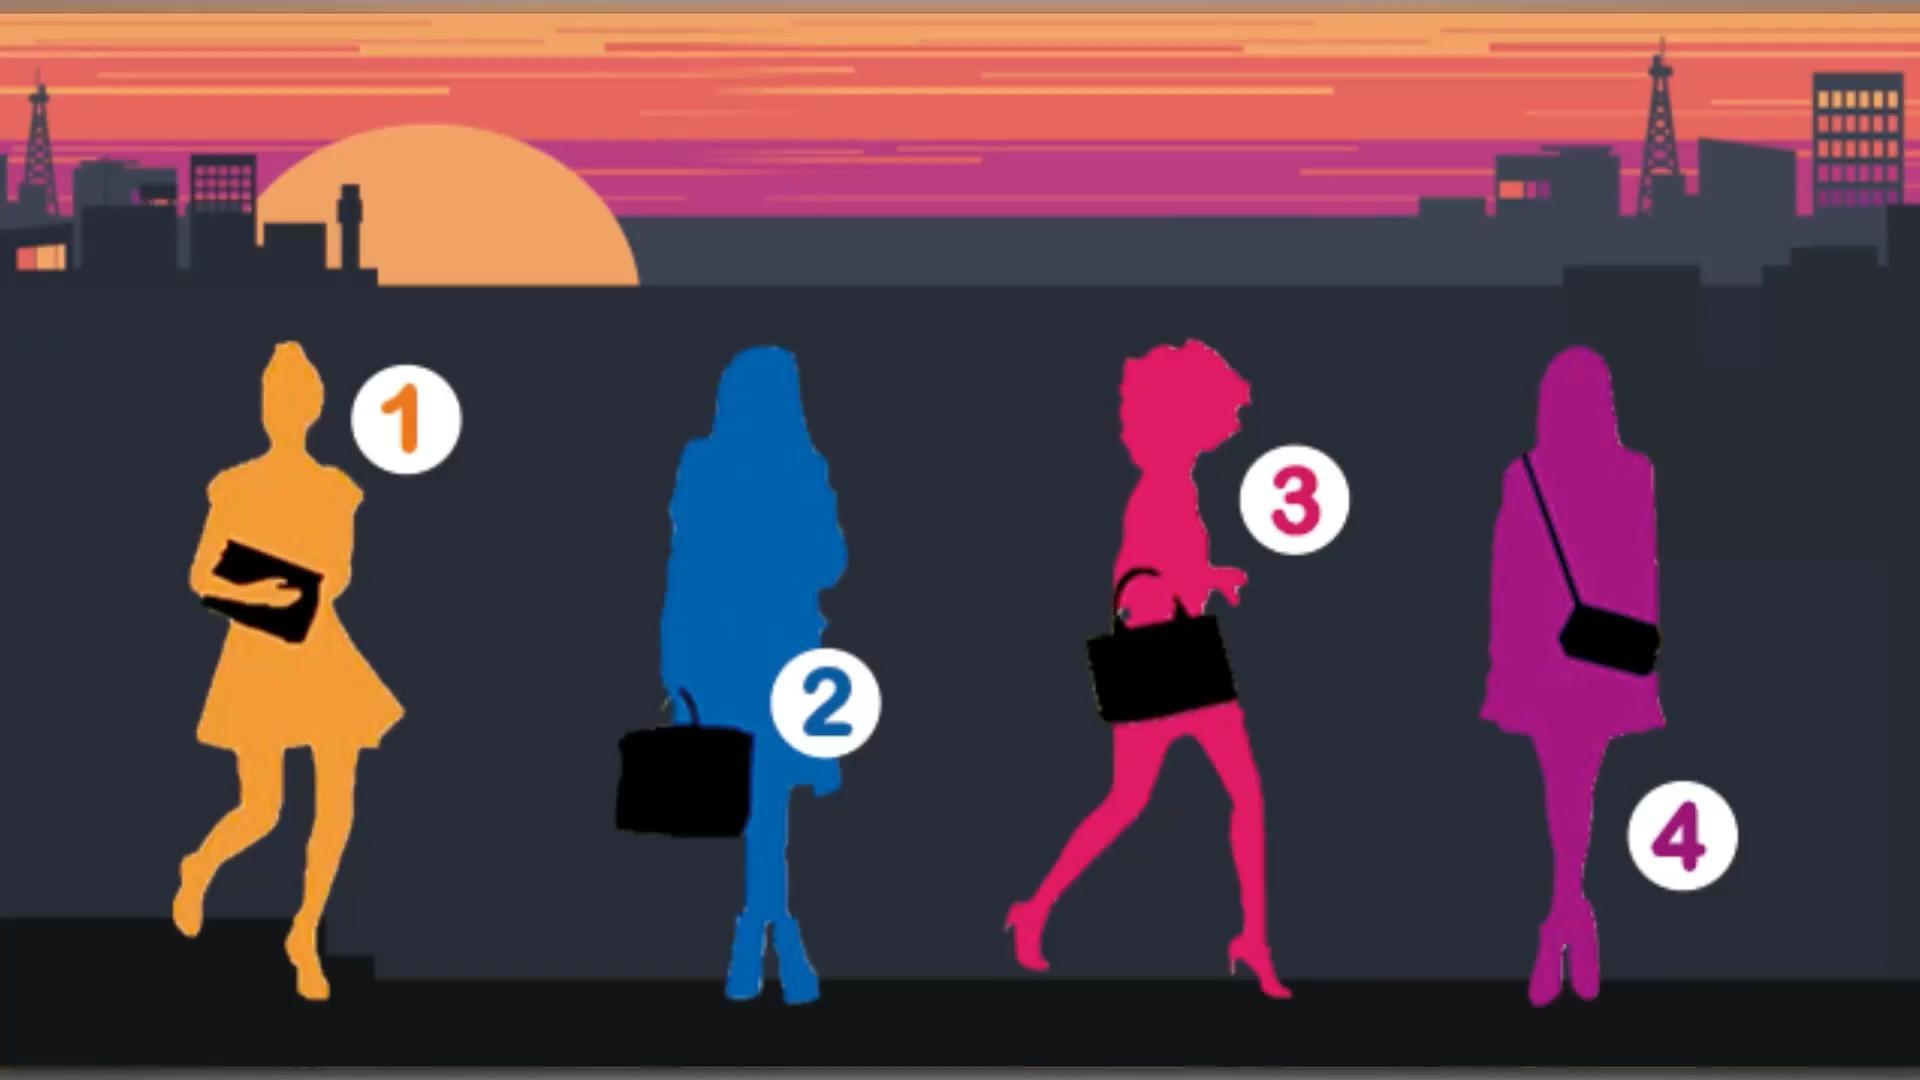 Which of these 4 silhouettes looks the oldest?  The personality check